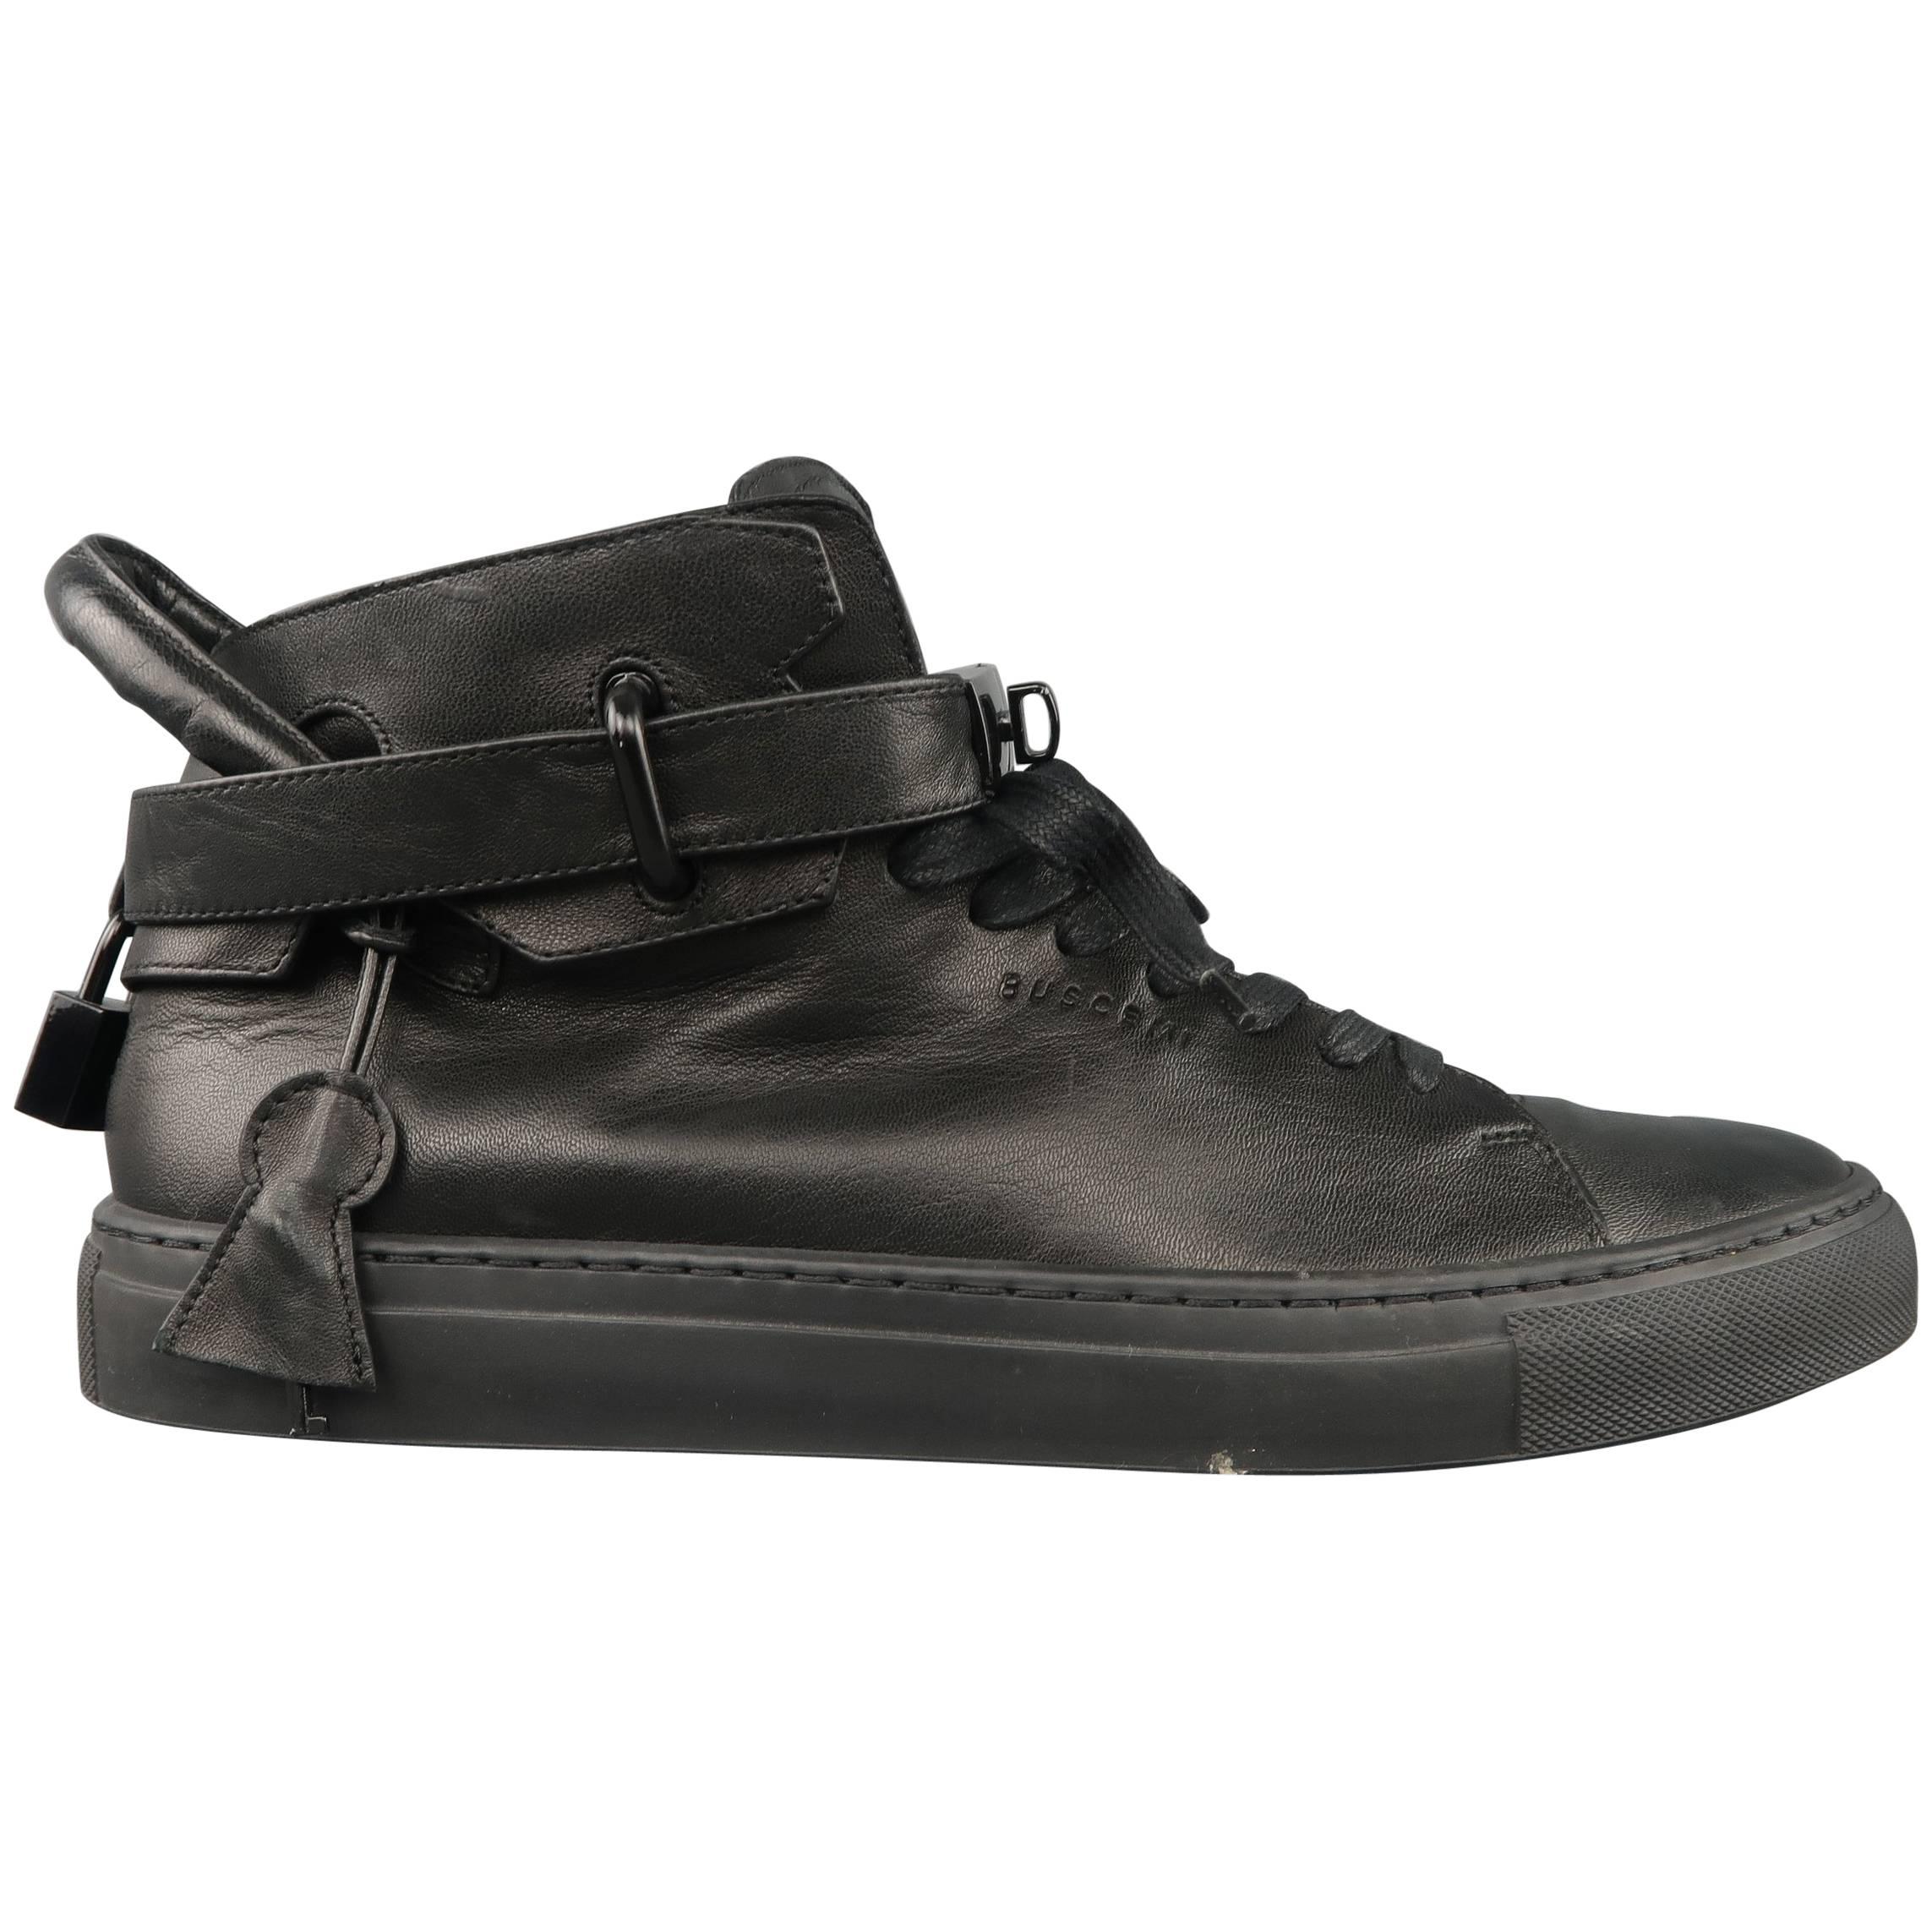 Men's BUSCEMI Size 11 Black Leather Padlock 100mm High Top Sneakers